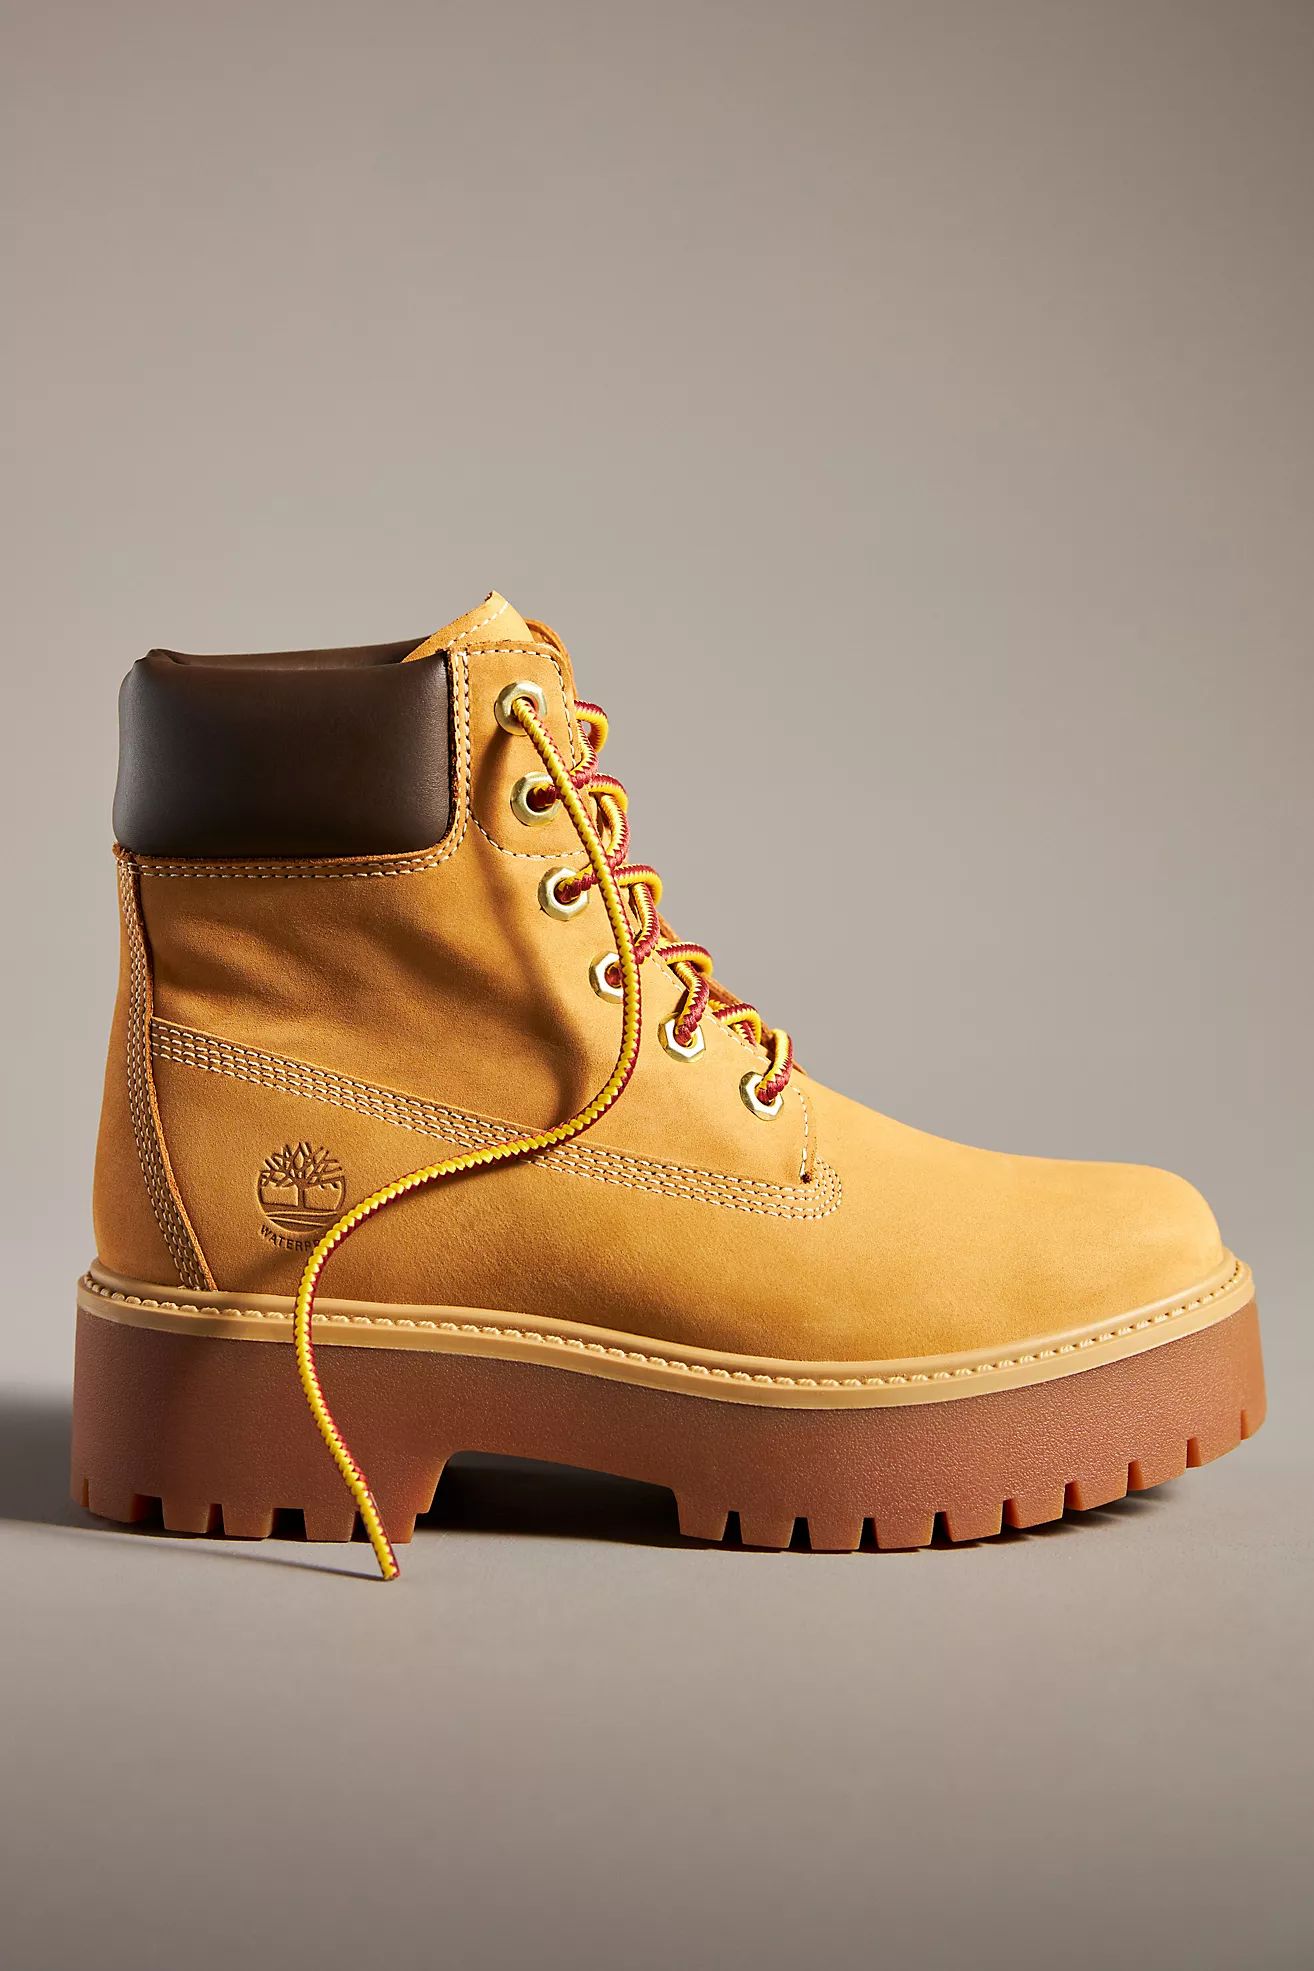 Timberland Stone Street Boots | Anthropologie (US)